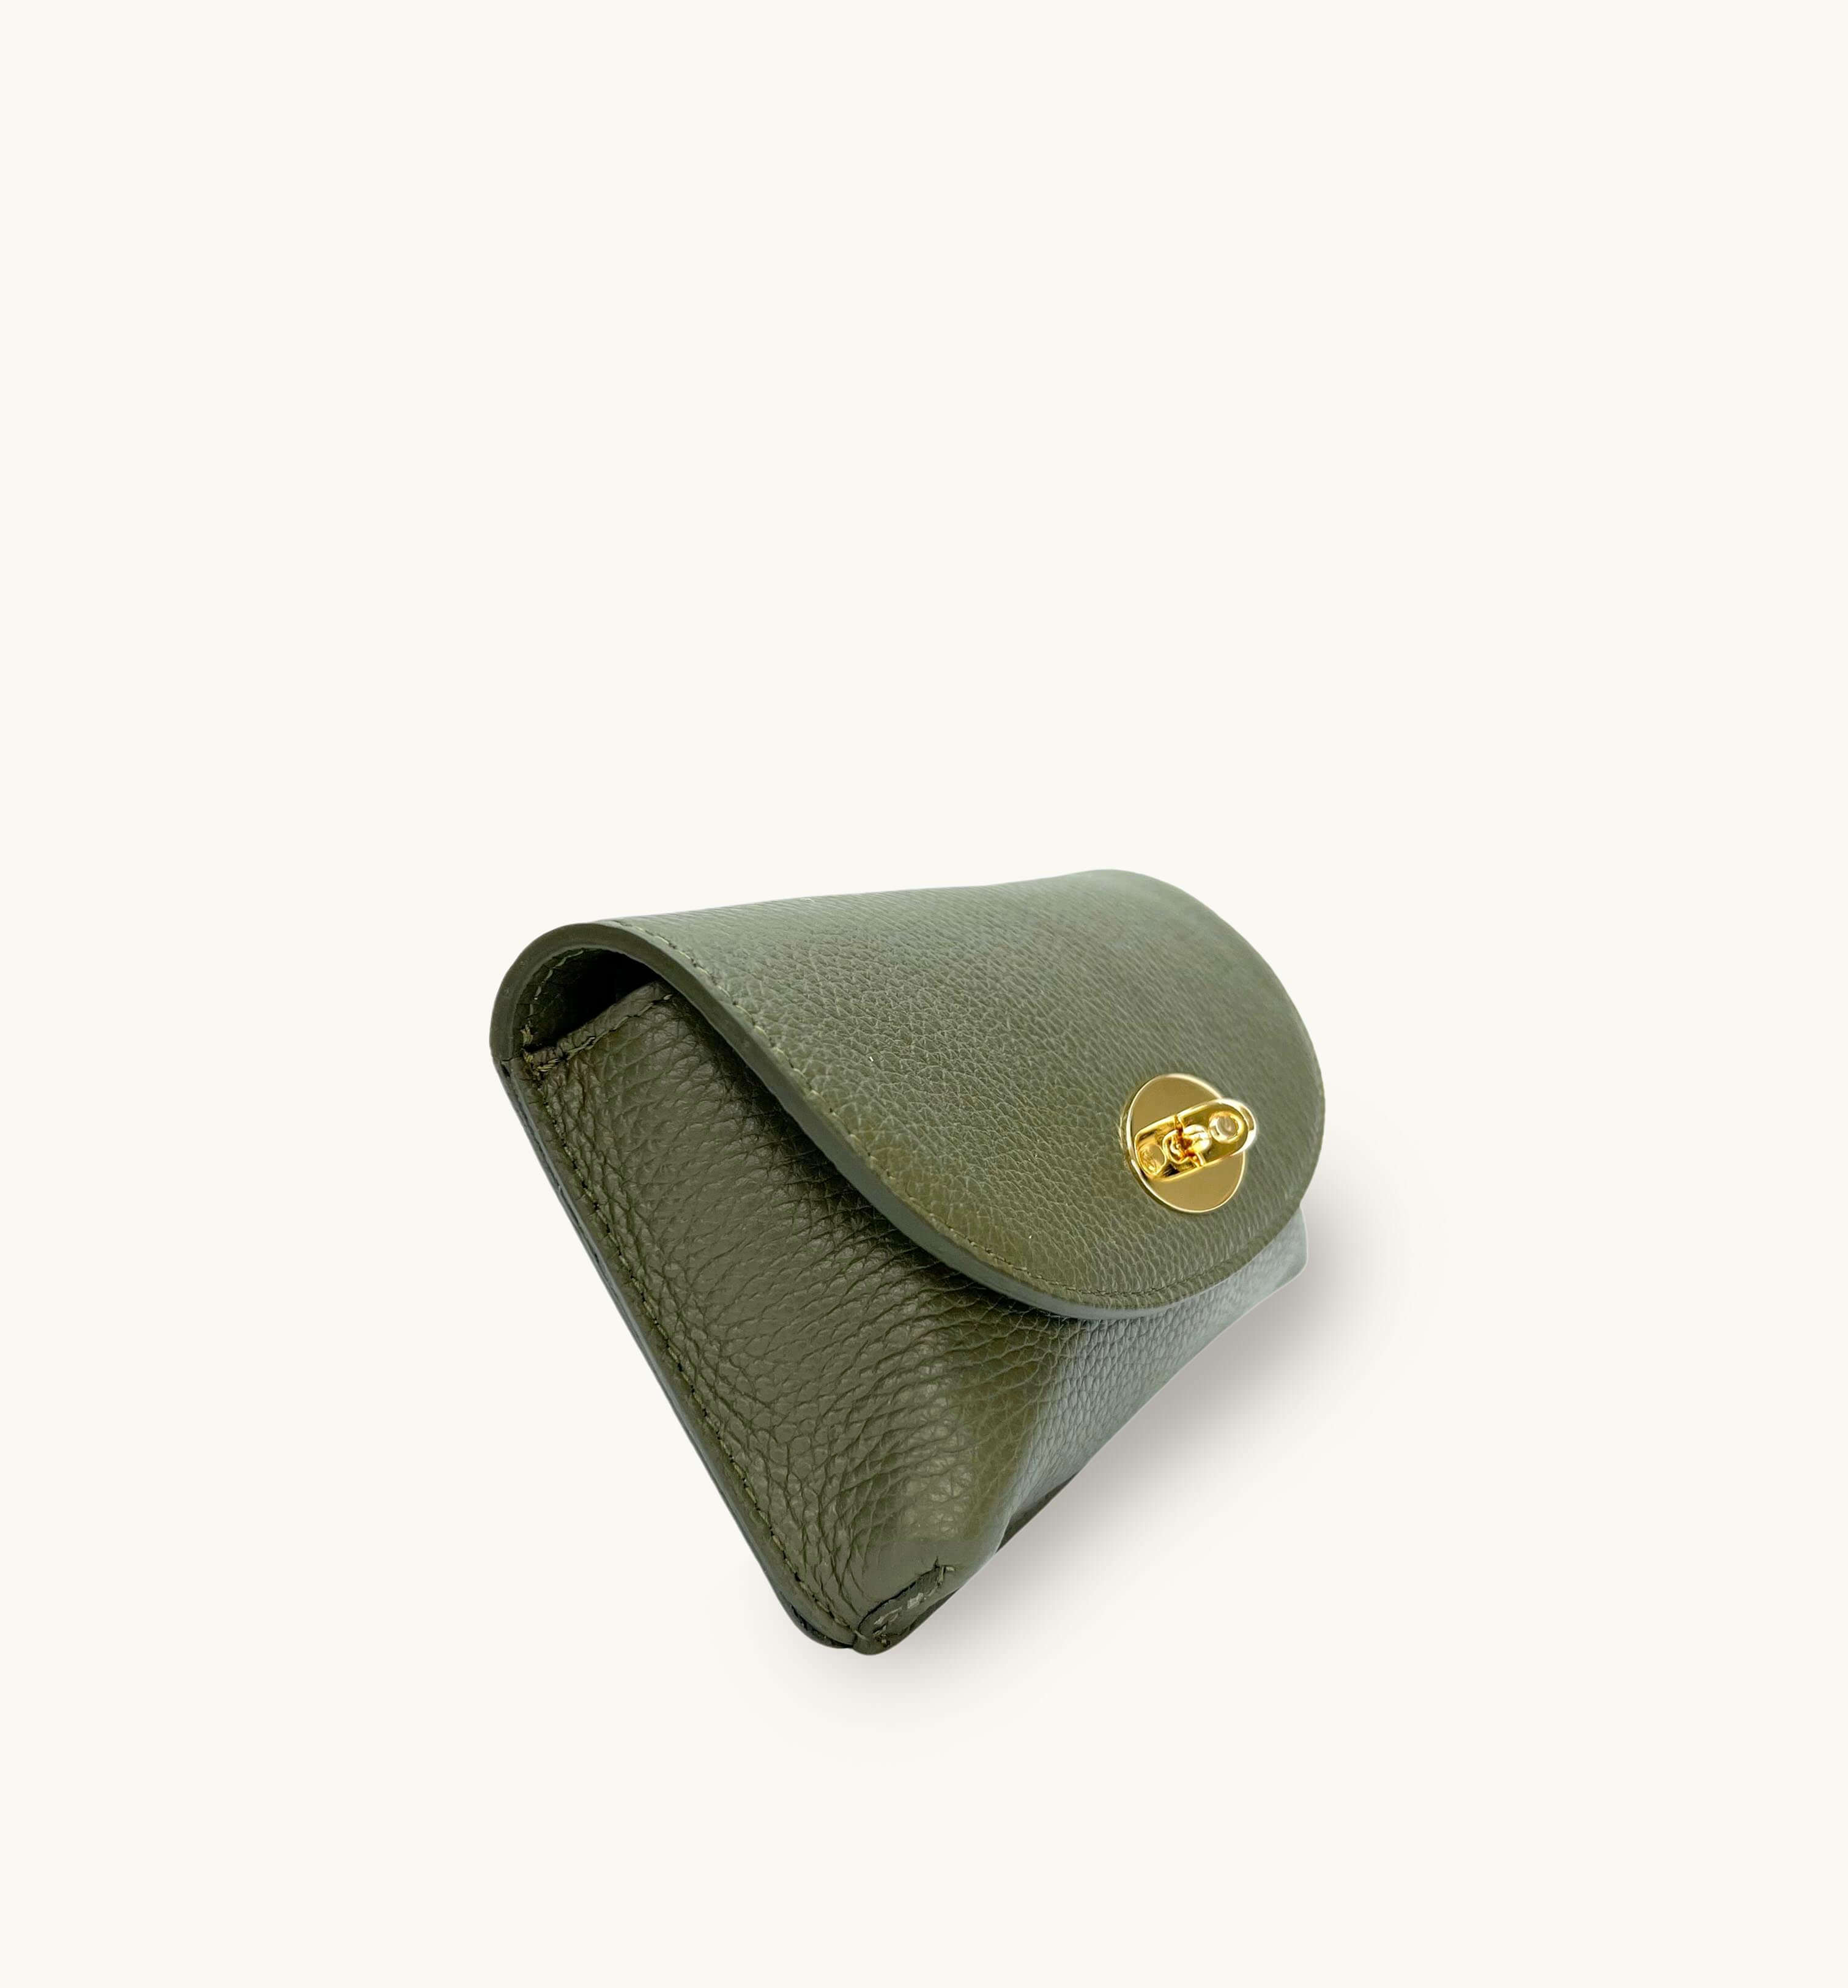 The Mila Olive Green Leather Phone Bag